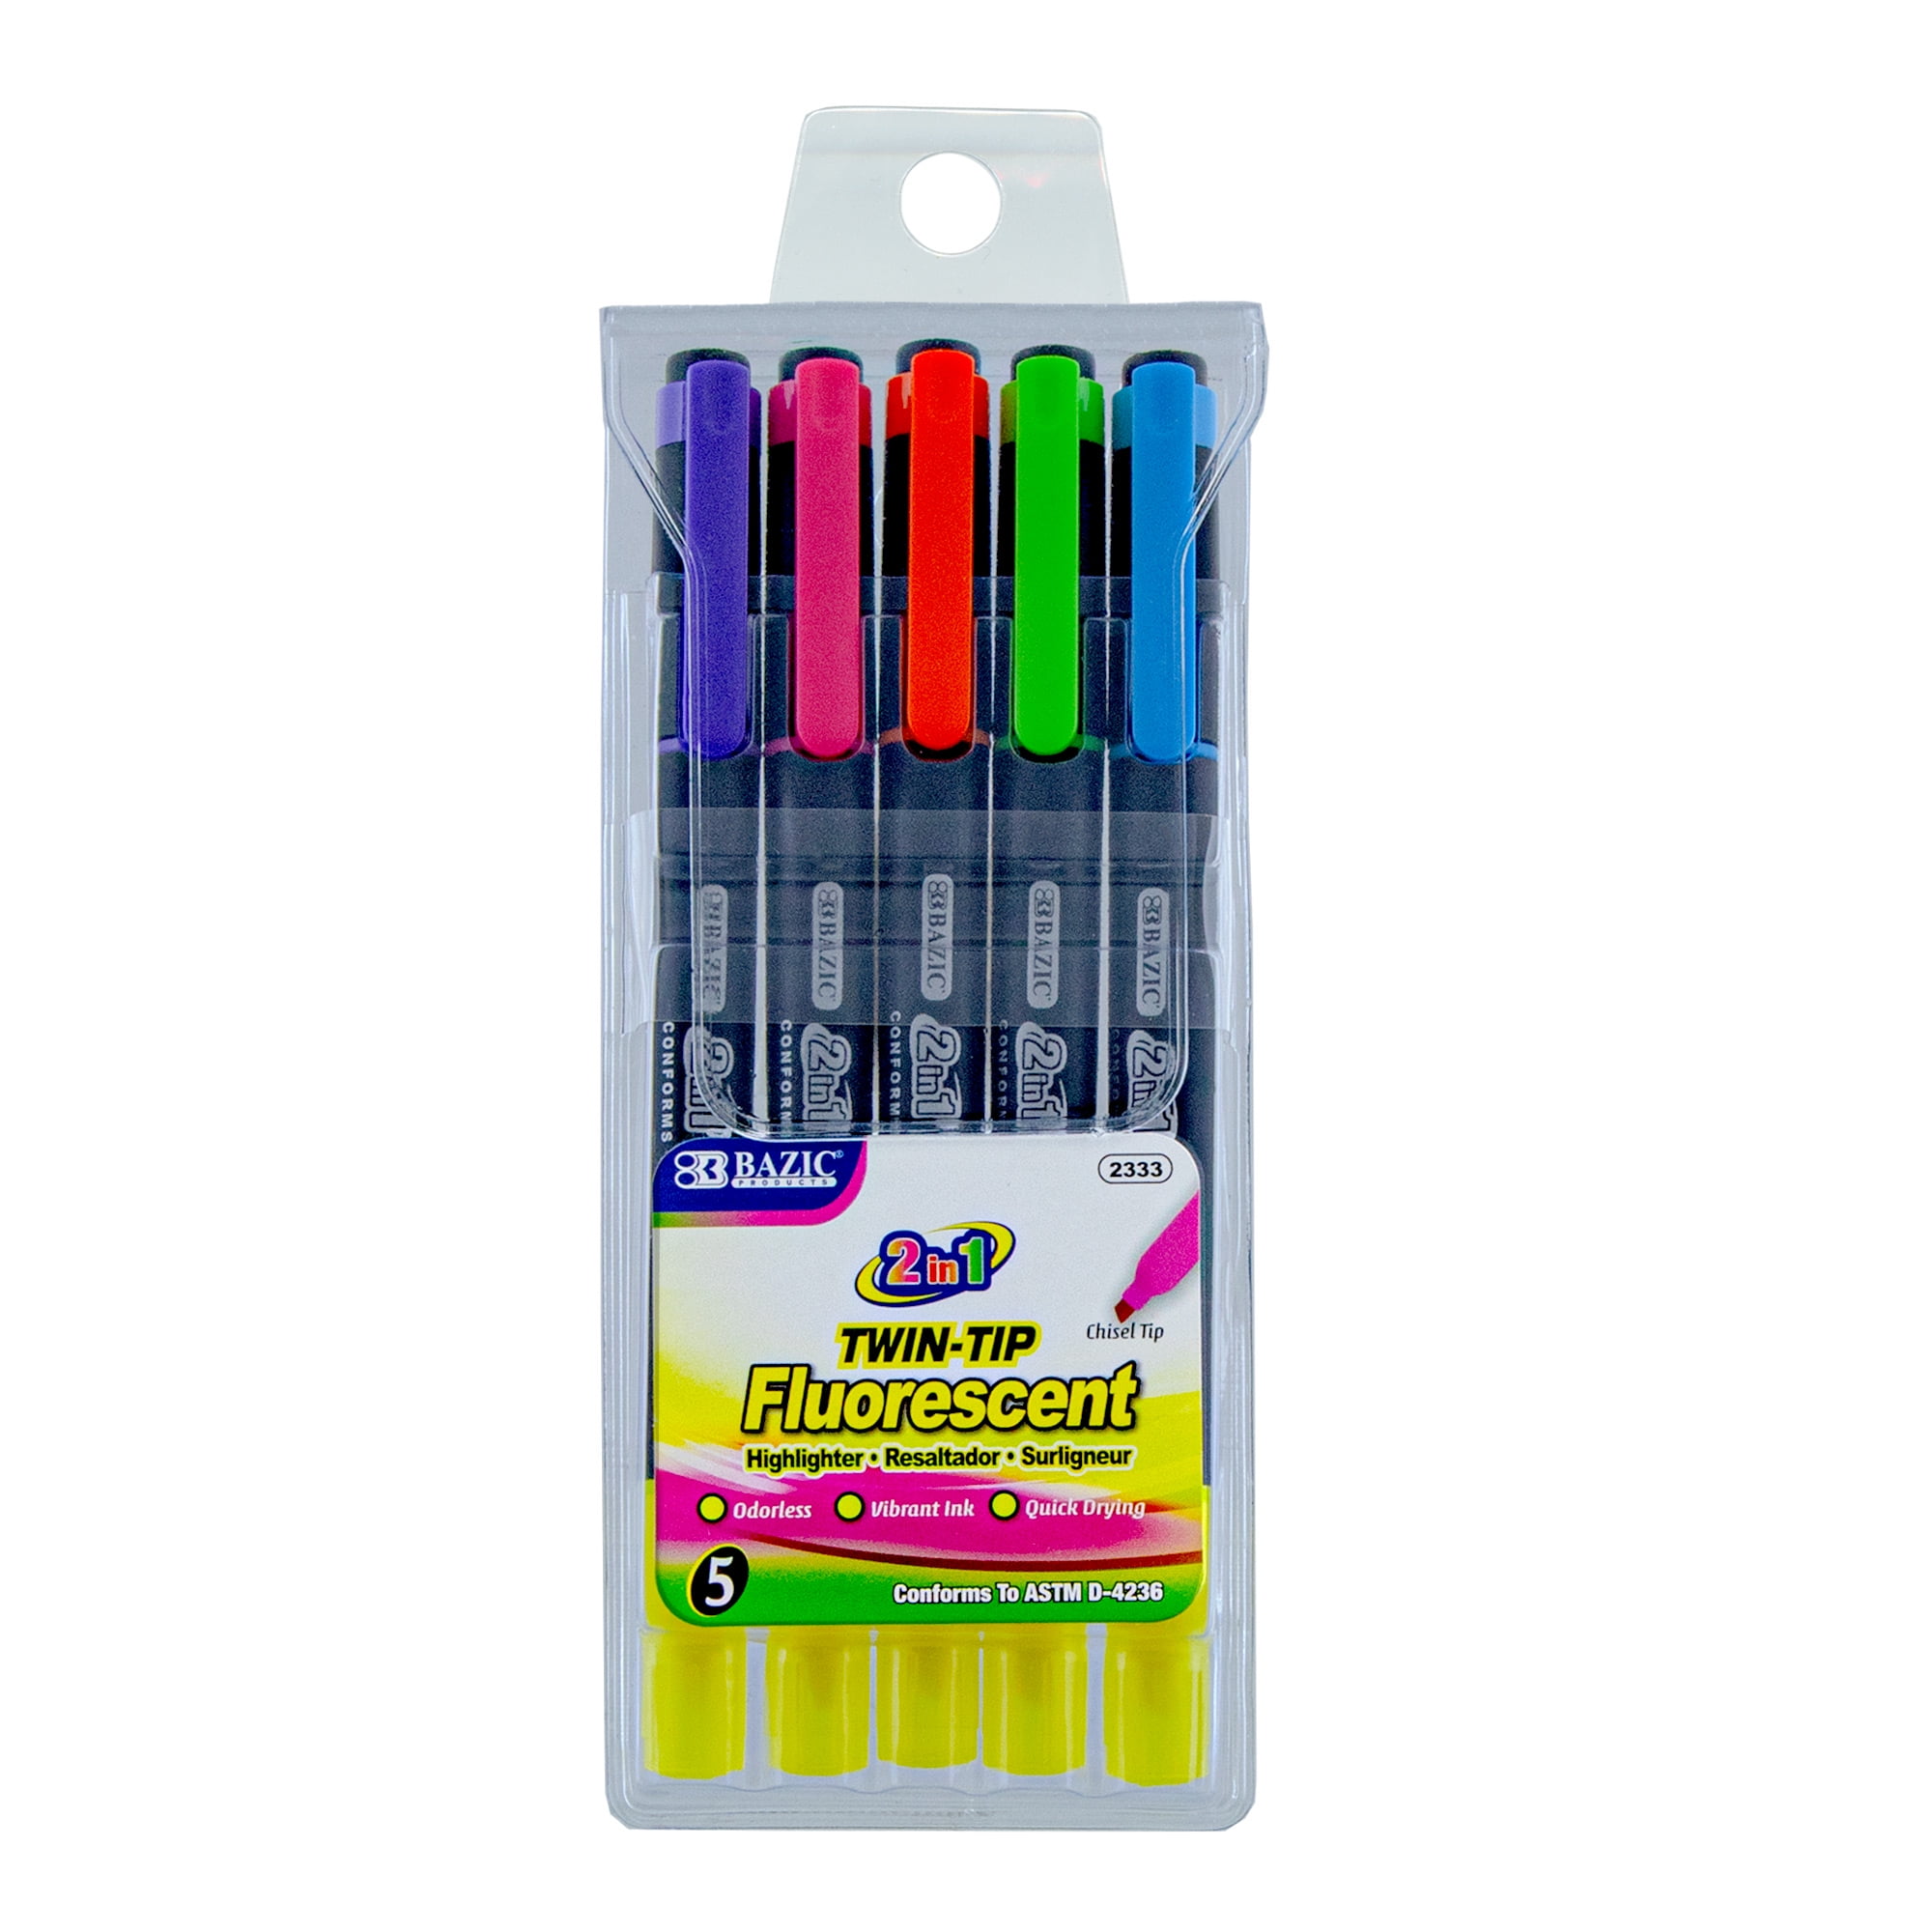 Picture of DDI 2276211 BAZIC Highlighters - 5 Count  Assorted Fluorescent Colors  Pen Clip  Twin Tips Case of 24